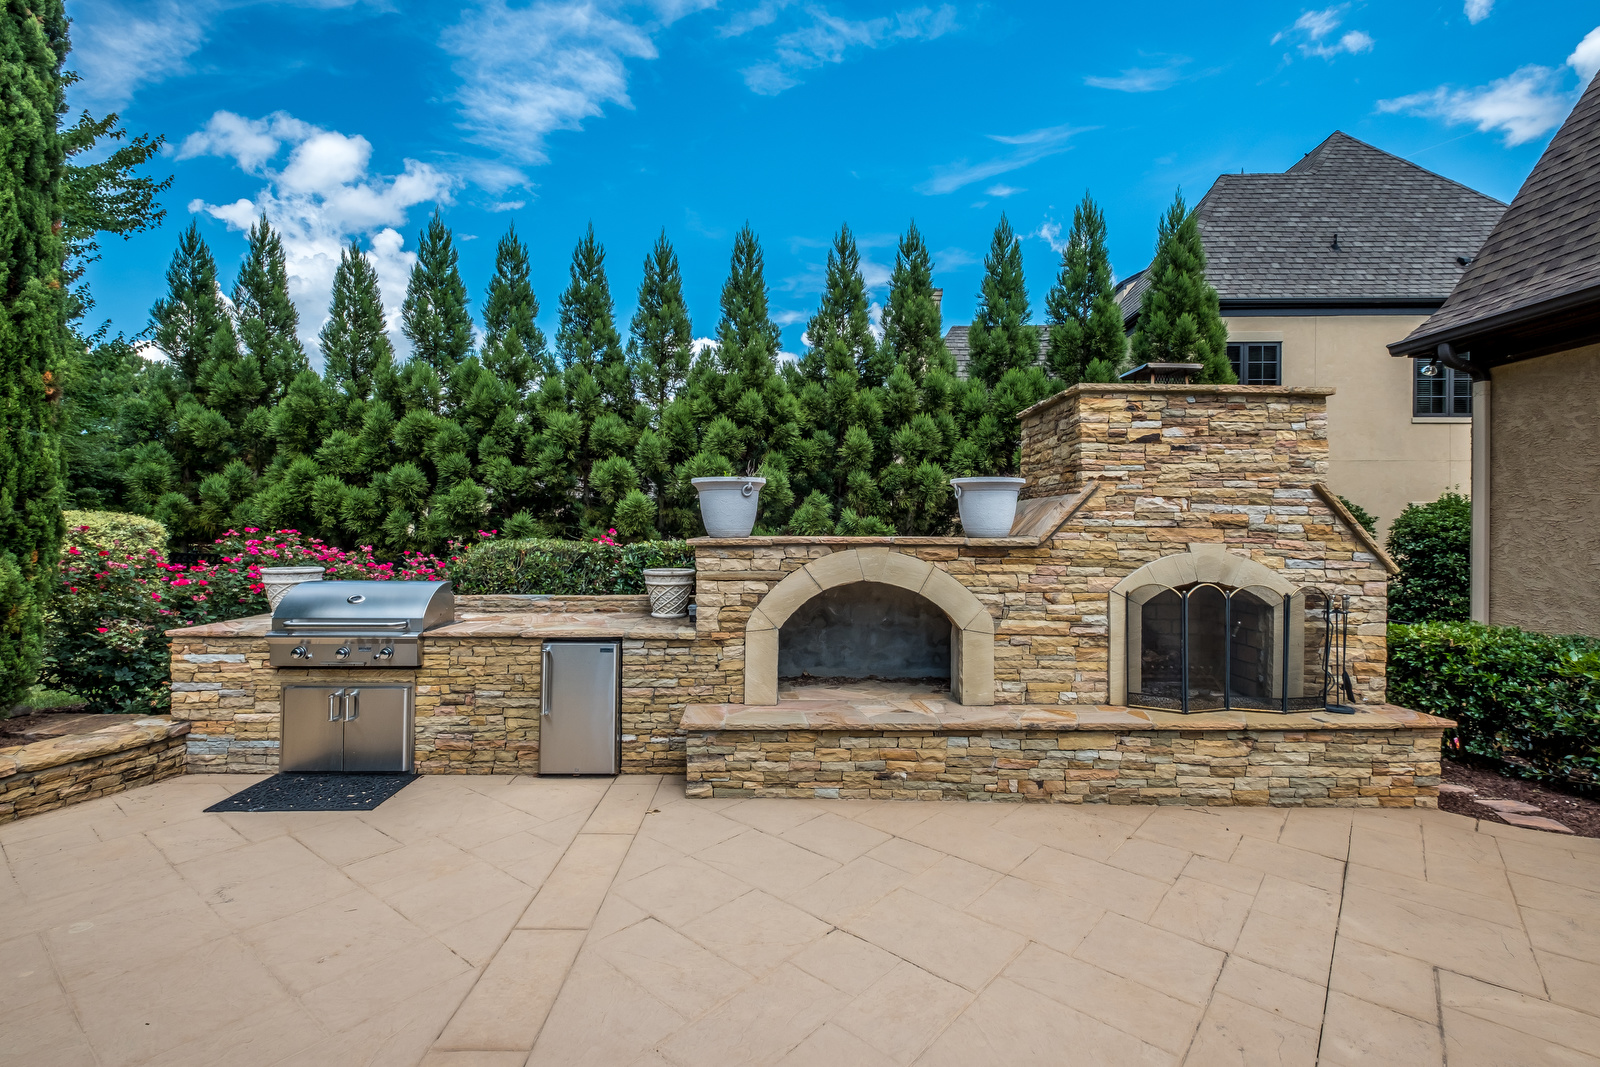 Backyard with built in grill area drink fridge pizza oven and fireplace stone details manicured trees in background